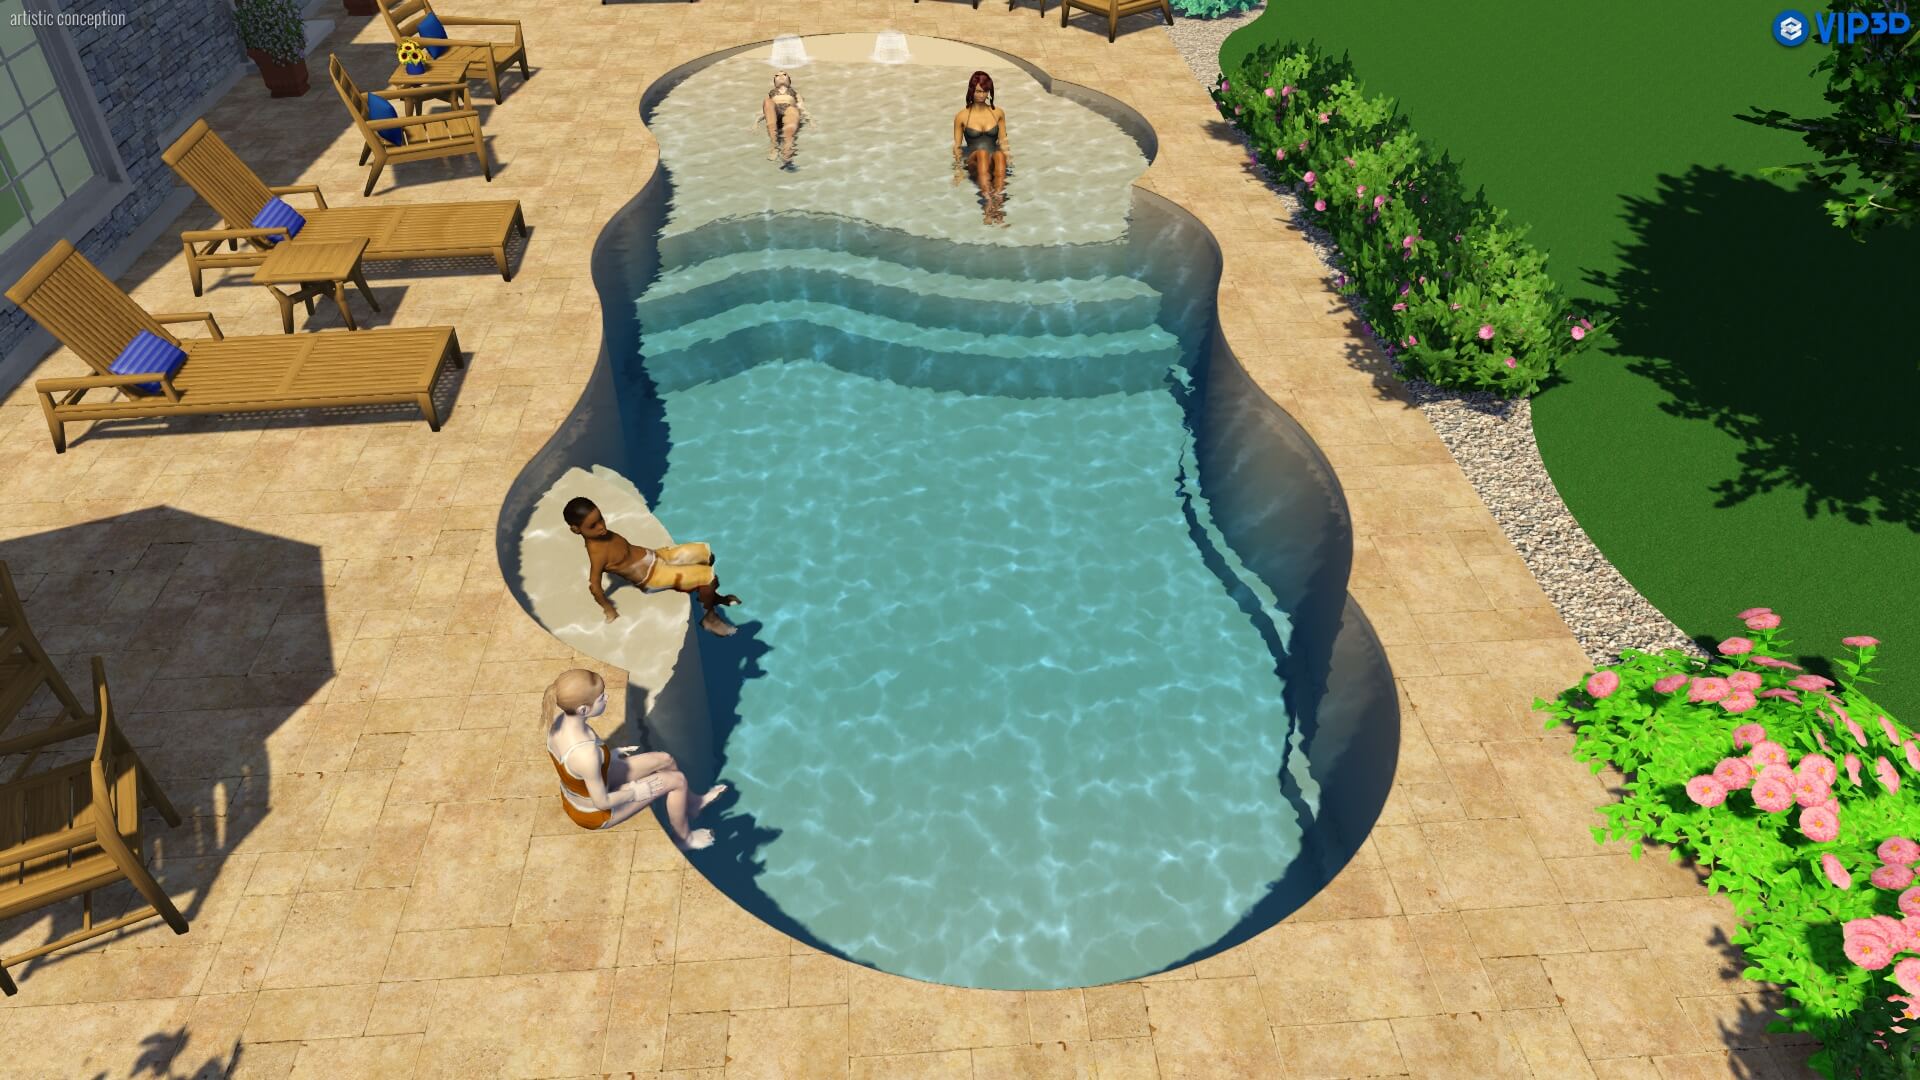 Five Reasons You and Your Family Will Love a Beach Entry Fiberglass Pool